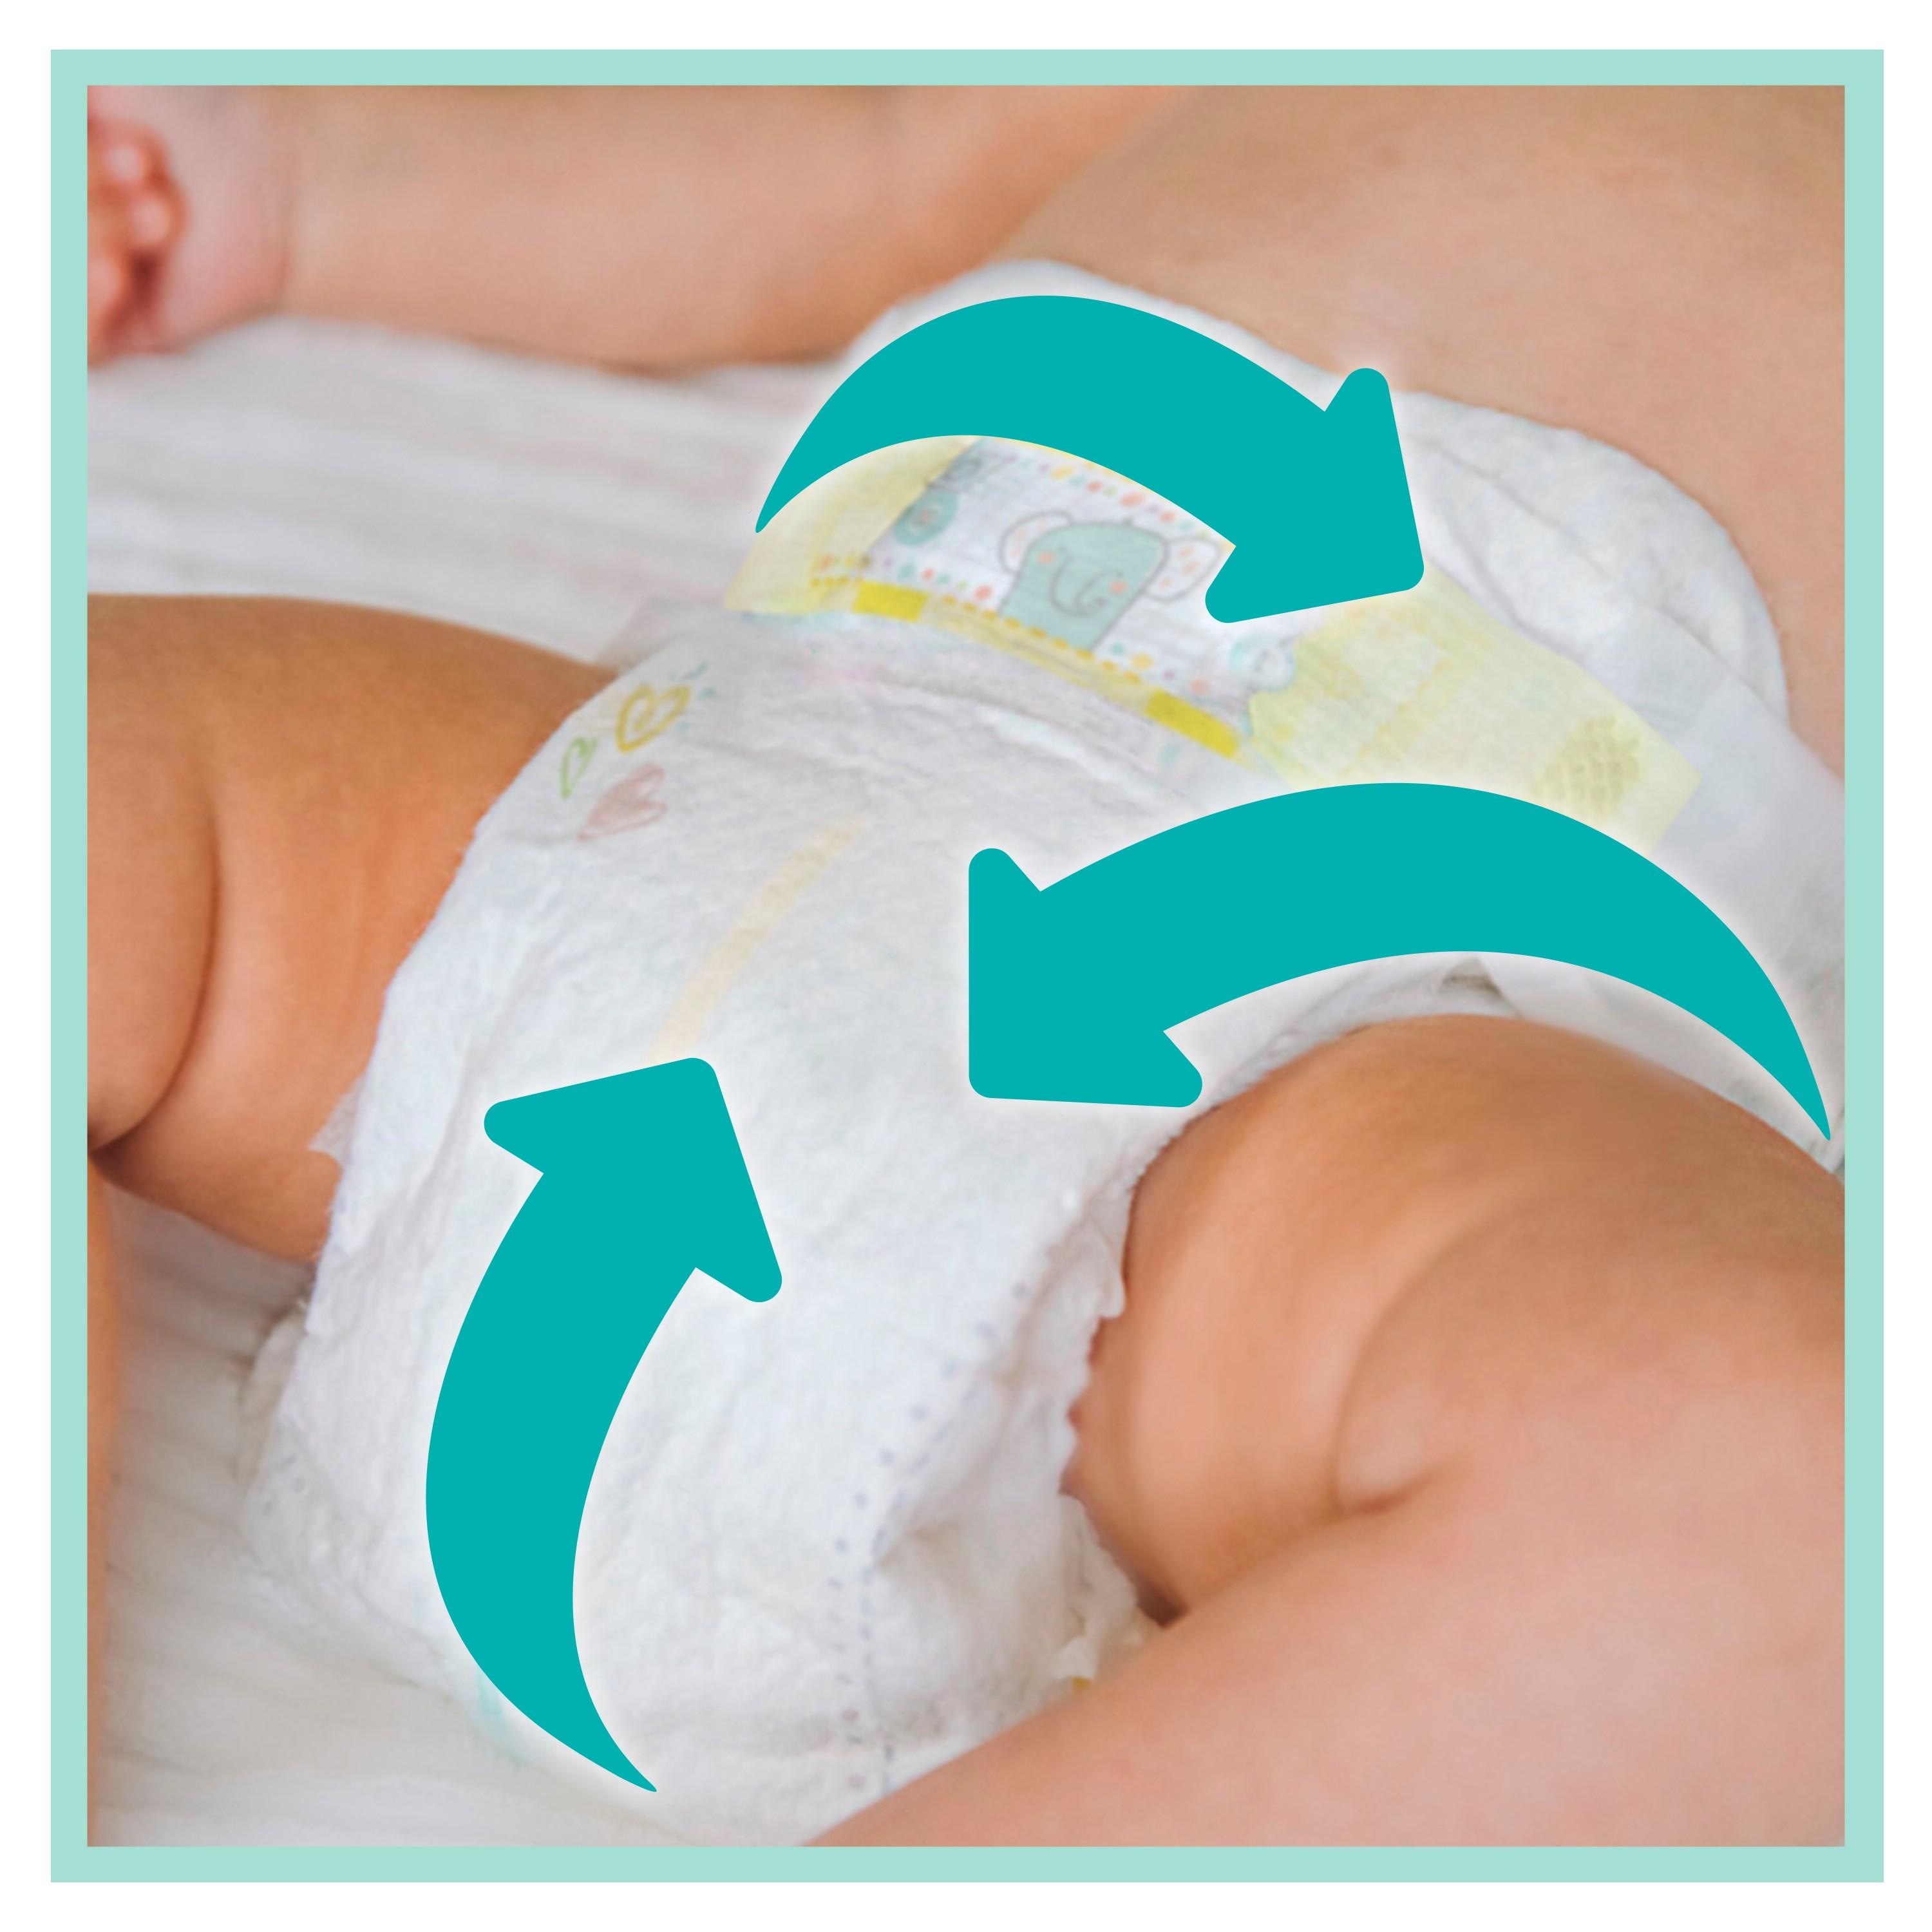 Pampers Premium Protection 81629463 Size 3, Nappy x204, 5kg-9kg